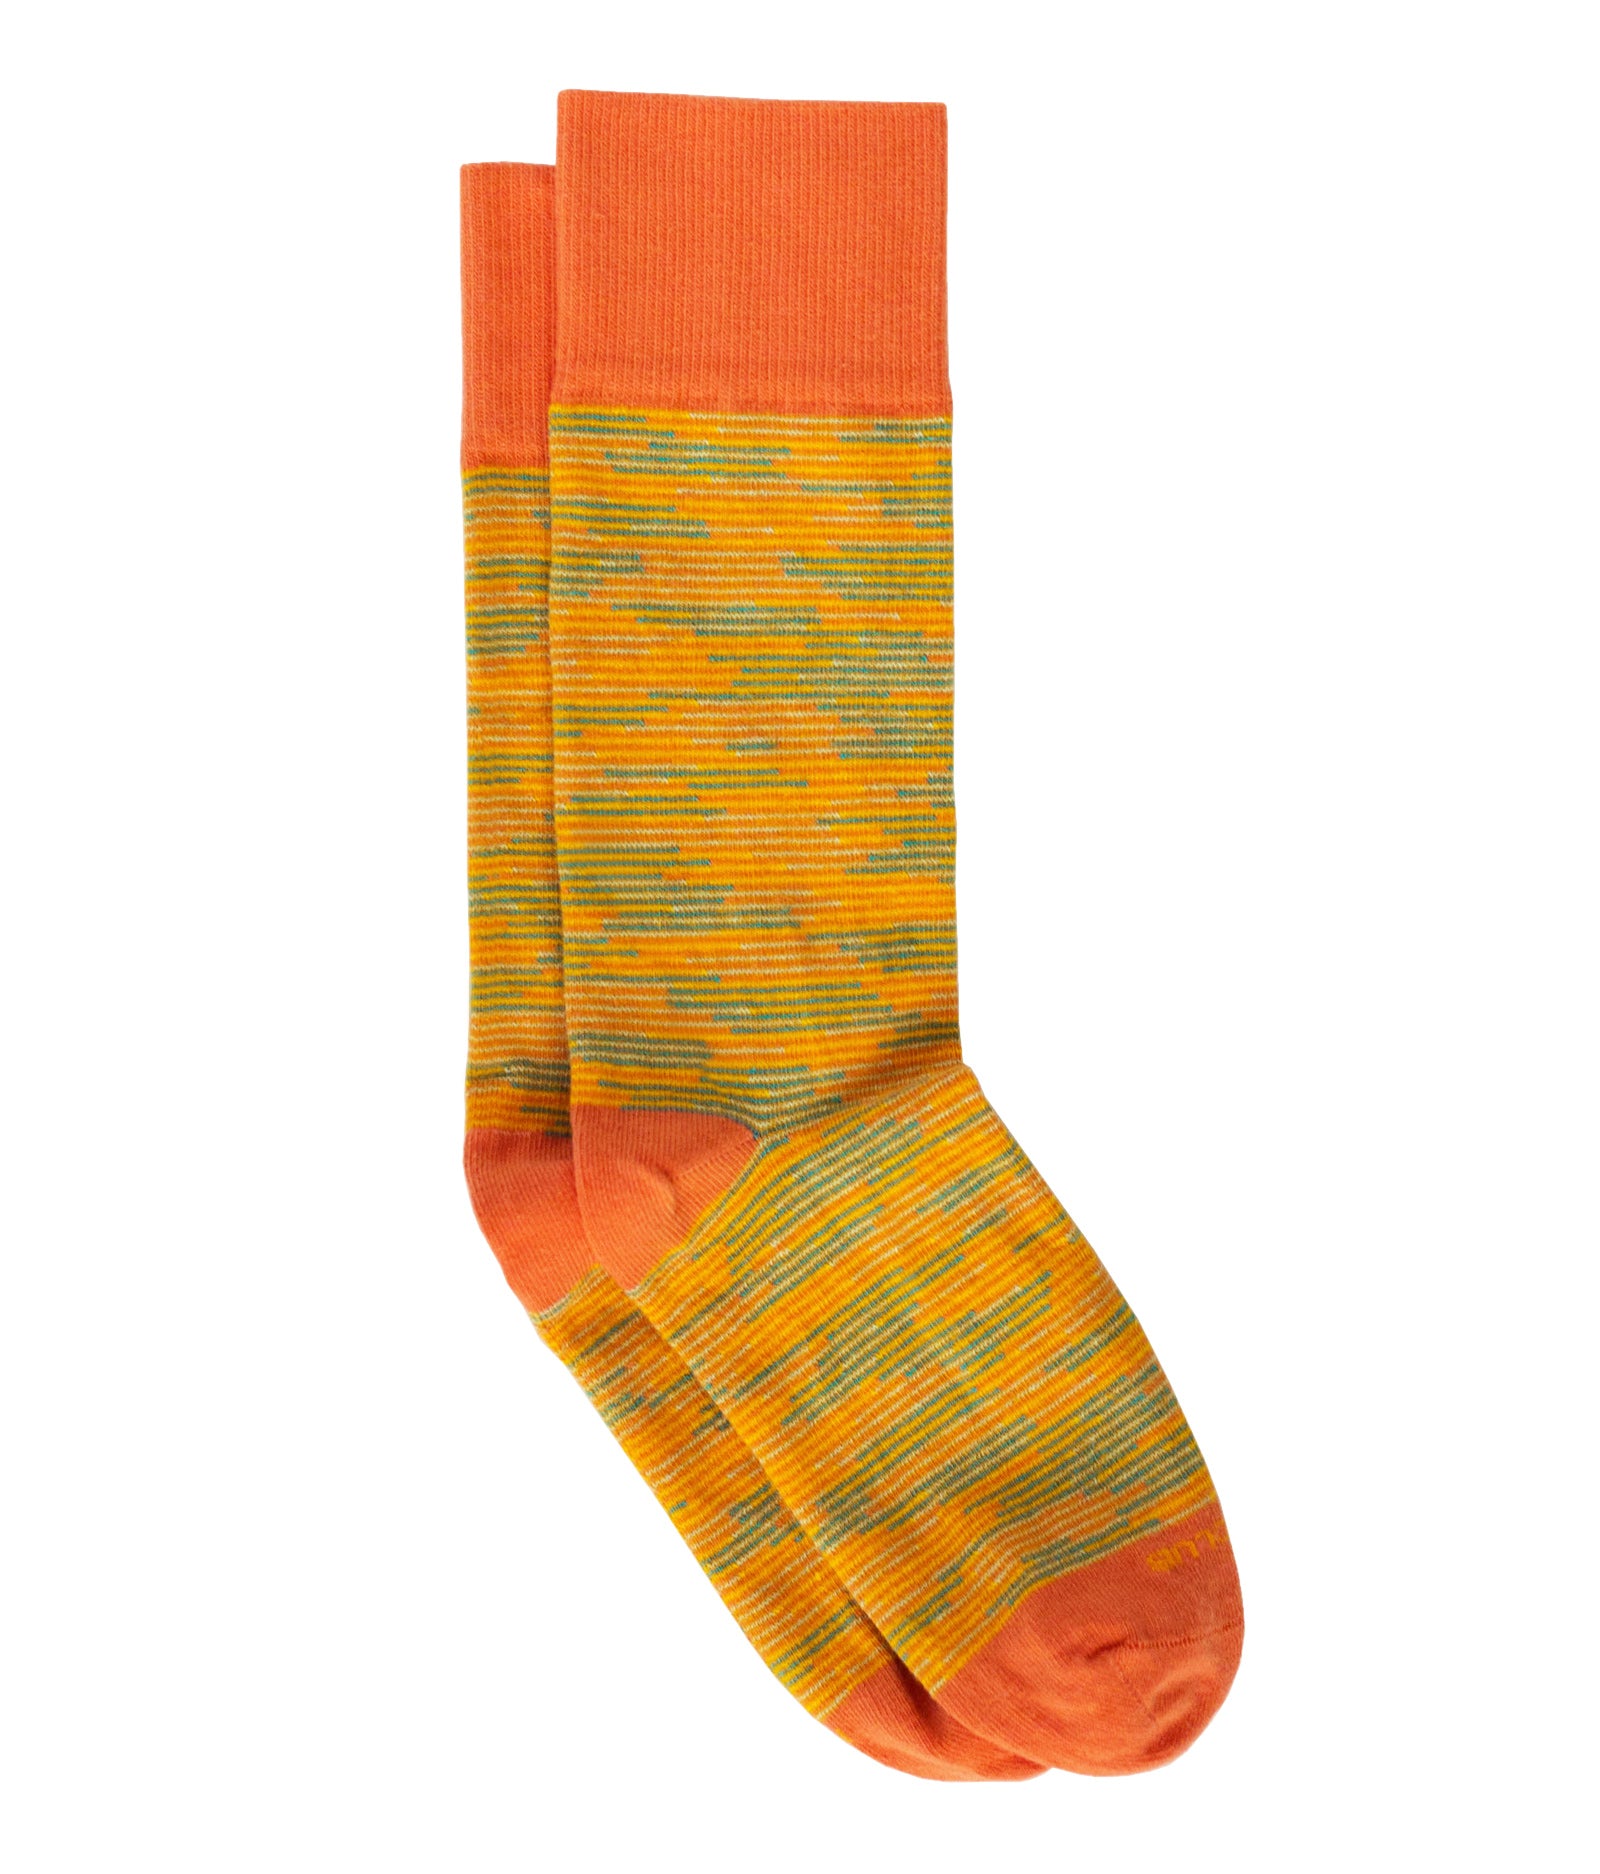 The Riley - Clementine - Sock Club Store